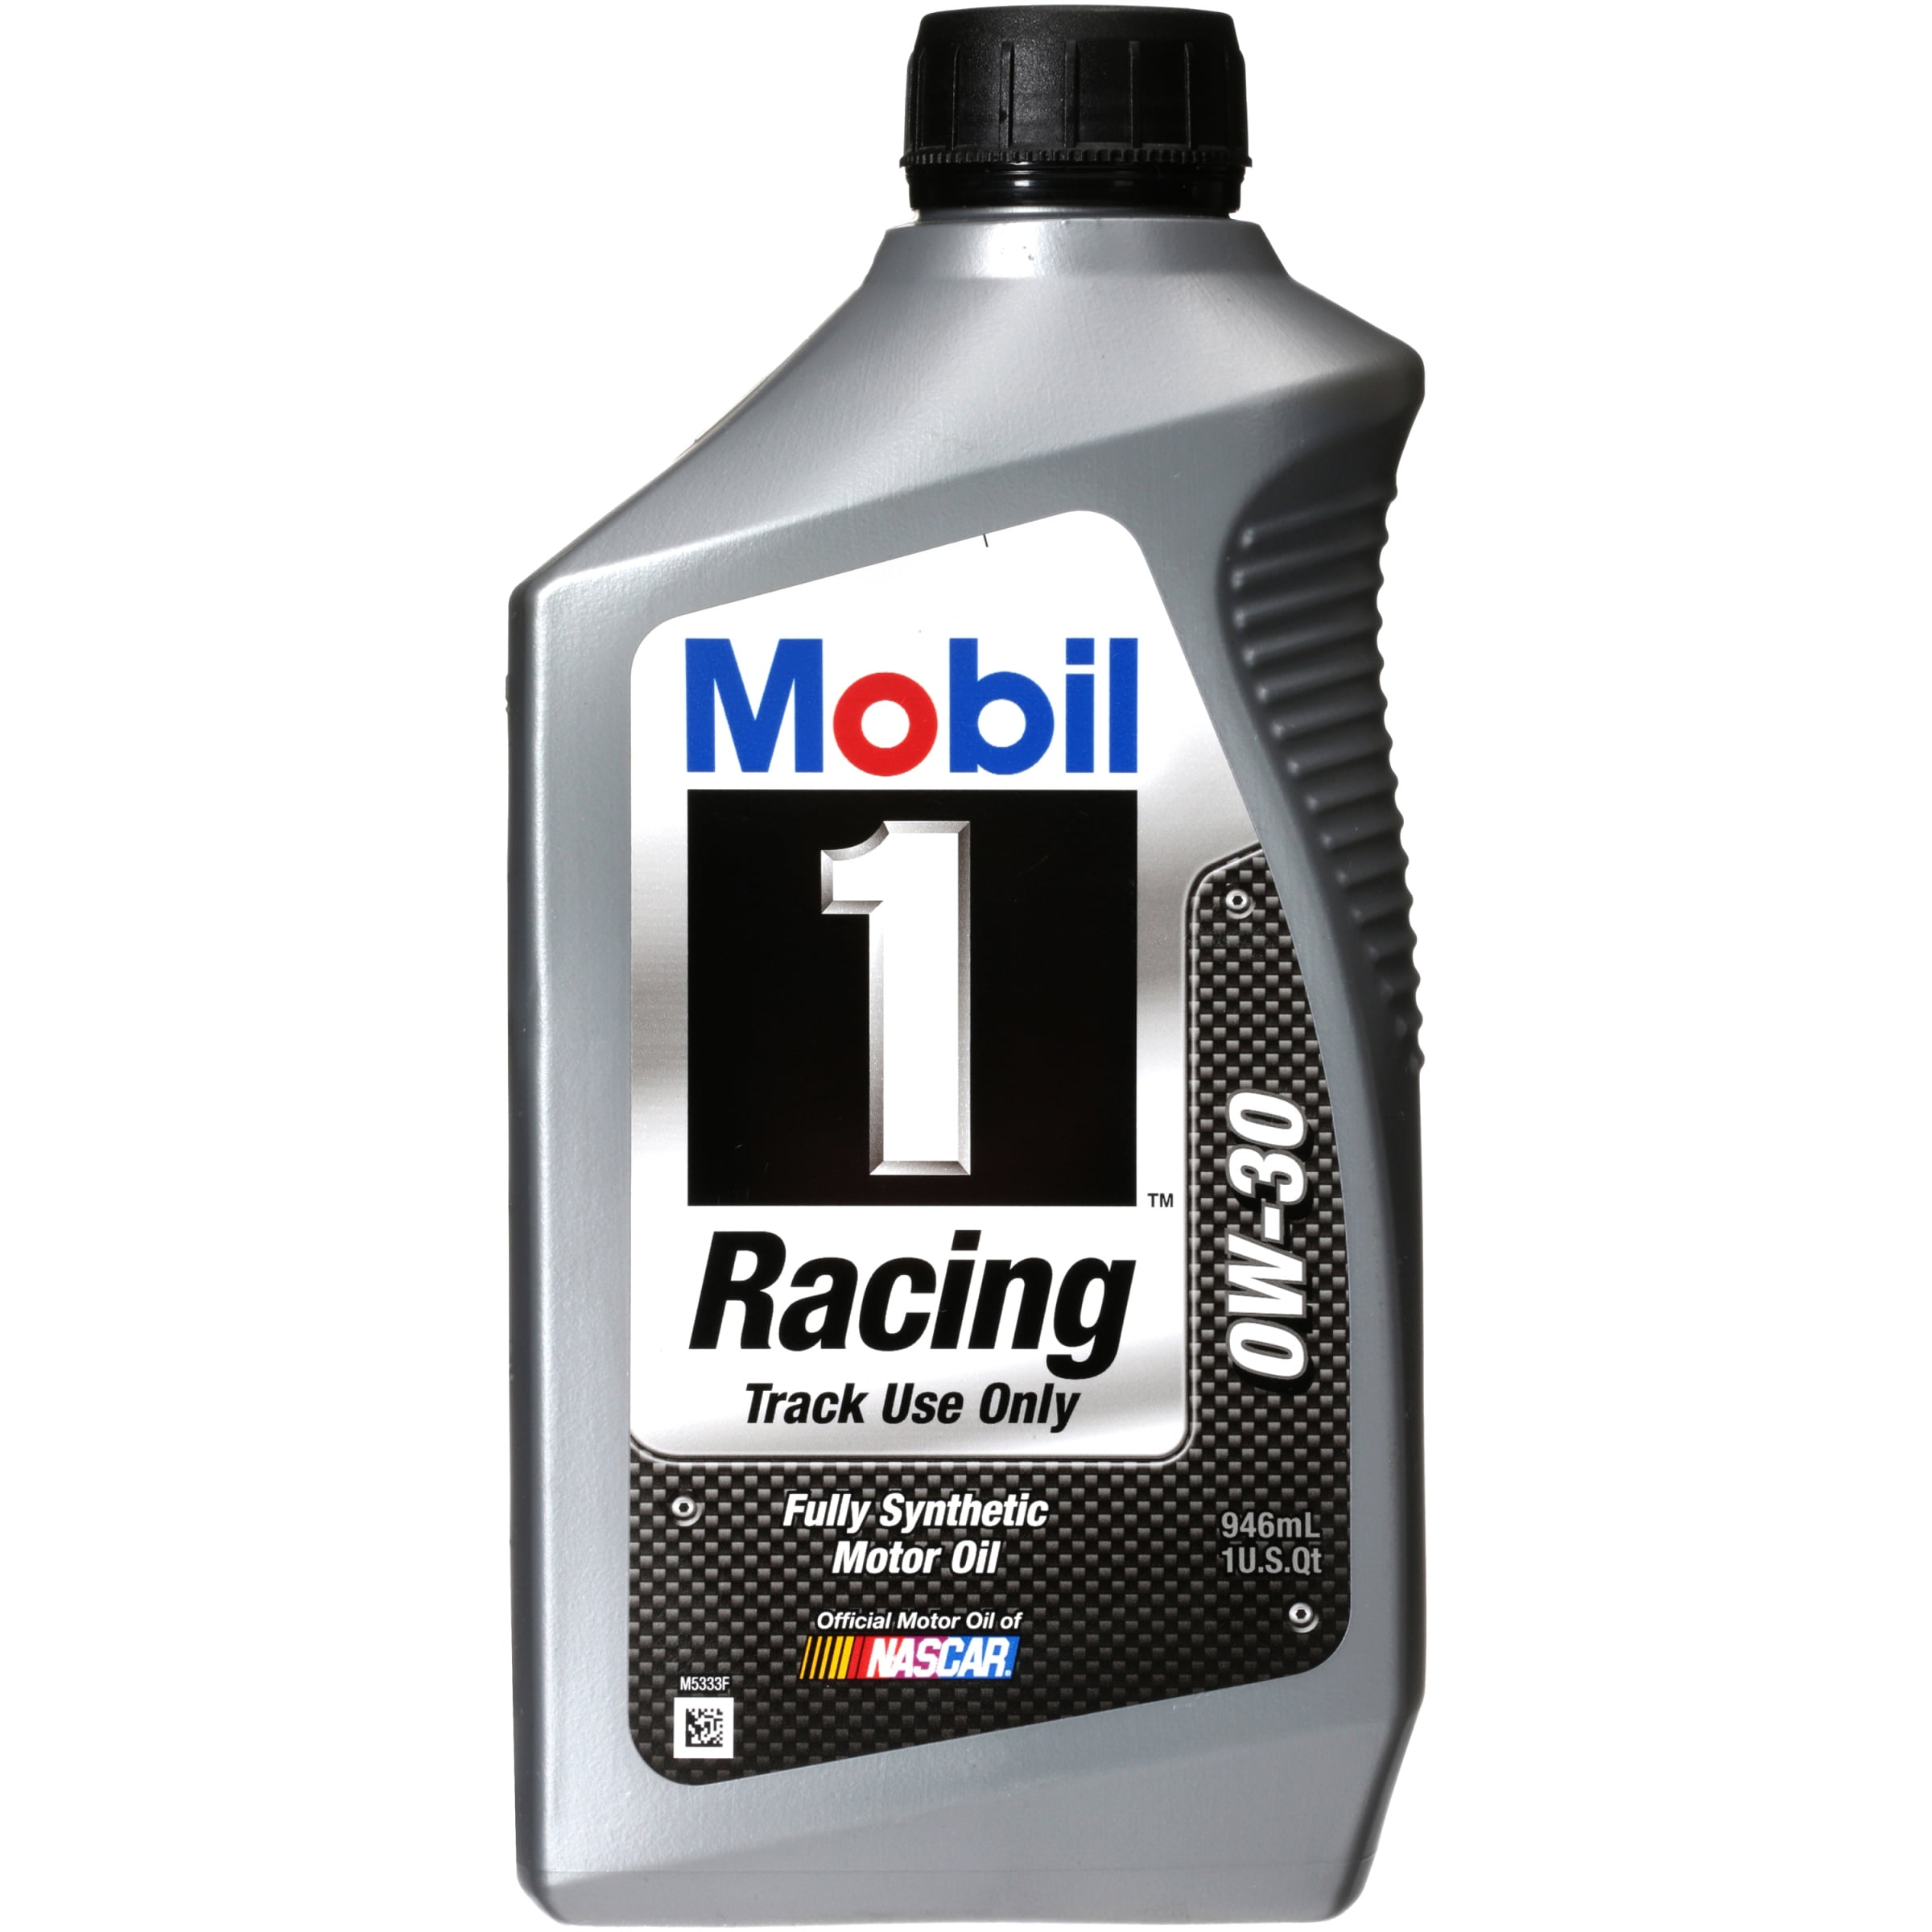  6 Pack Mobil 1 Racing Synthetic Motor  Oil  0W30 1 Quart 